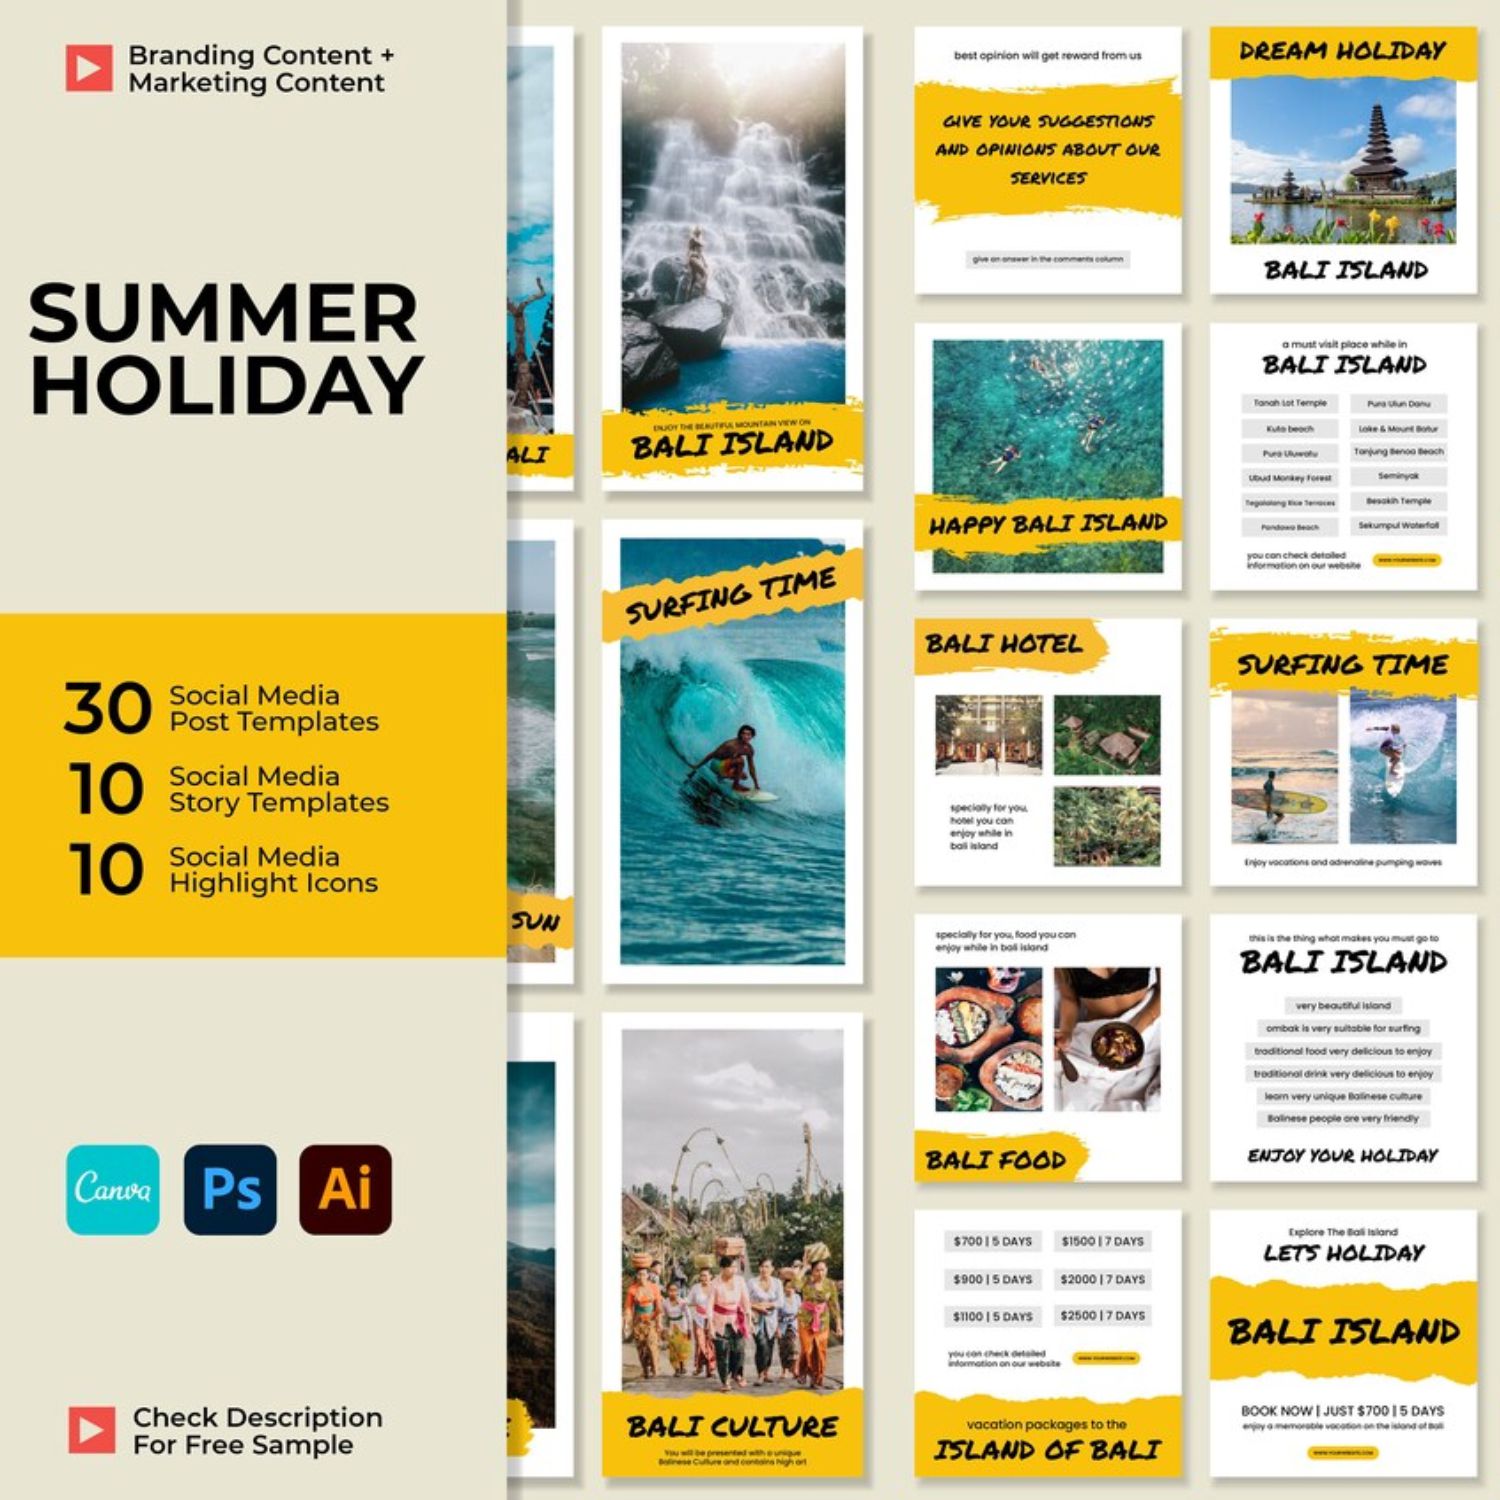 Marketing Summer Holiday Instagram Post Templates Cover Image.